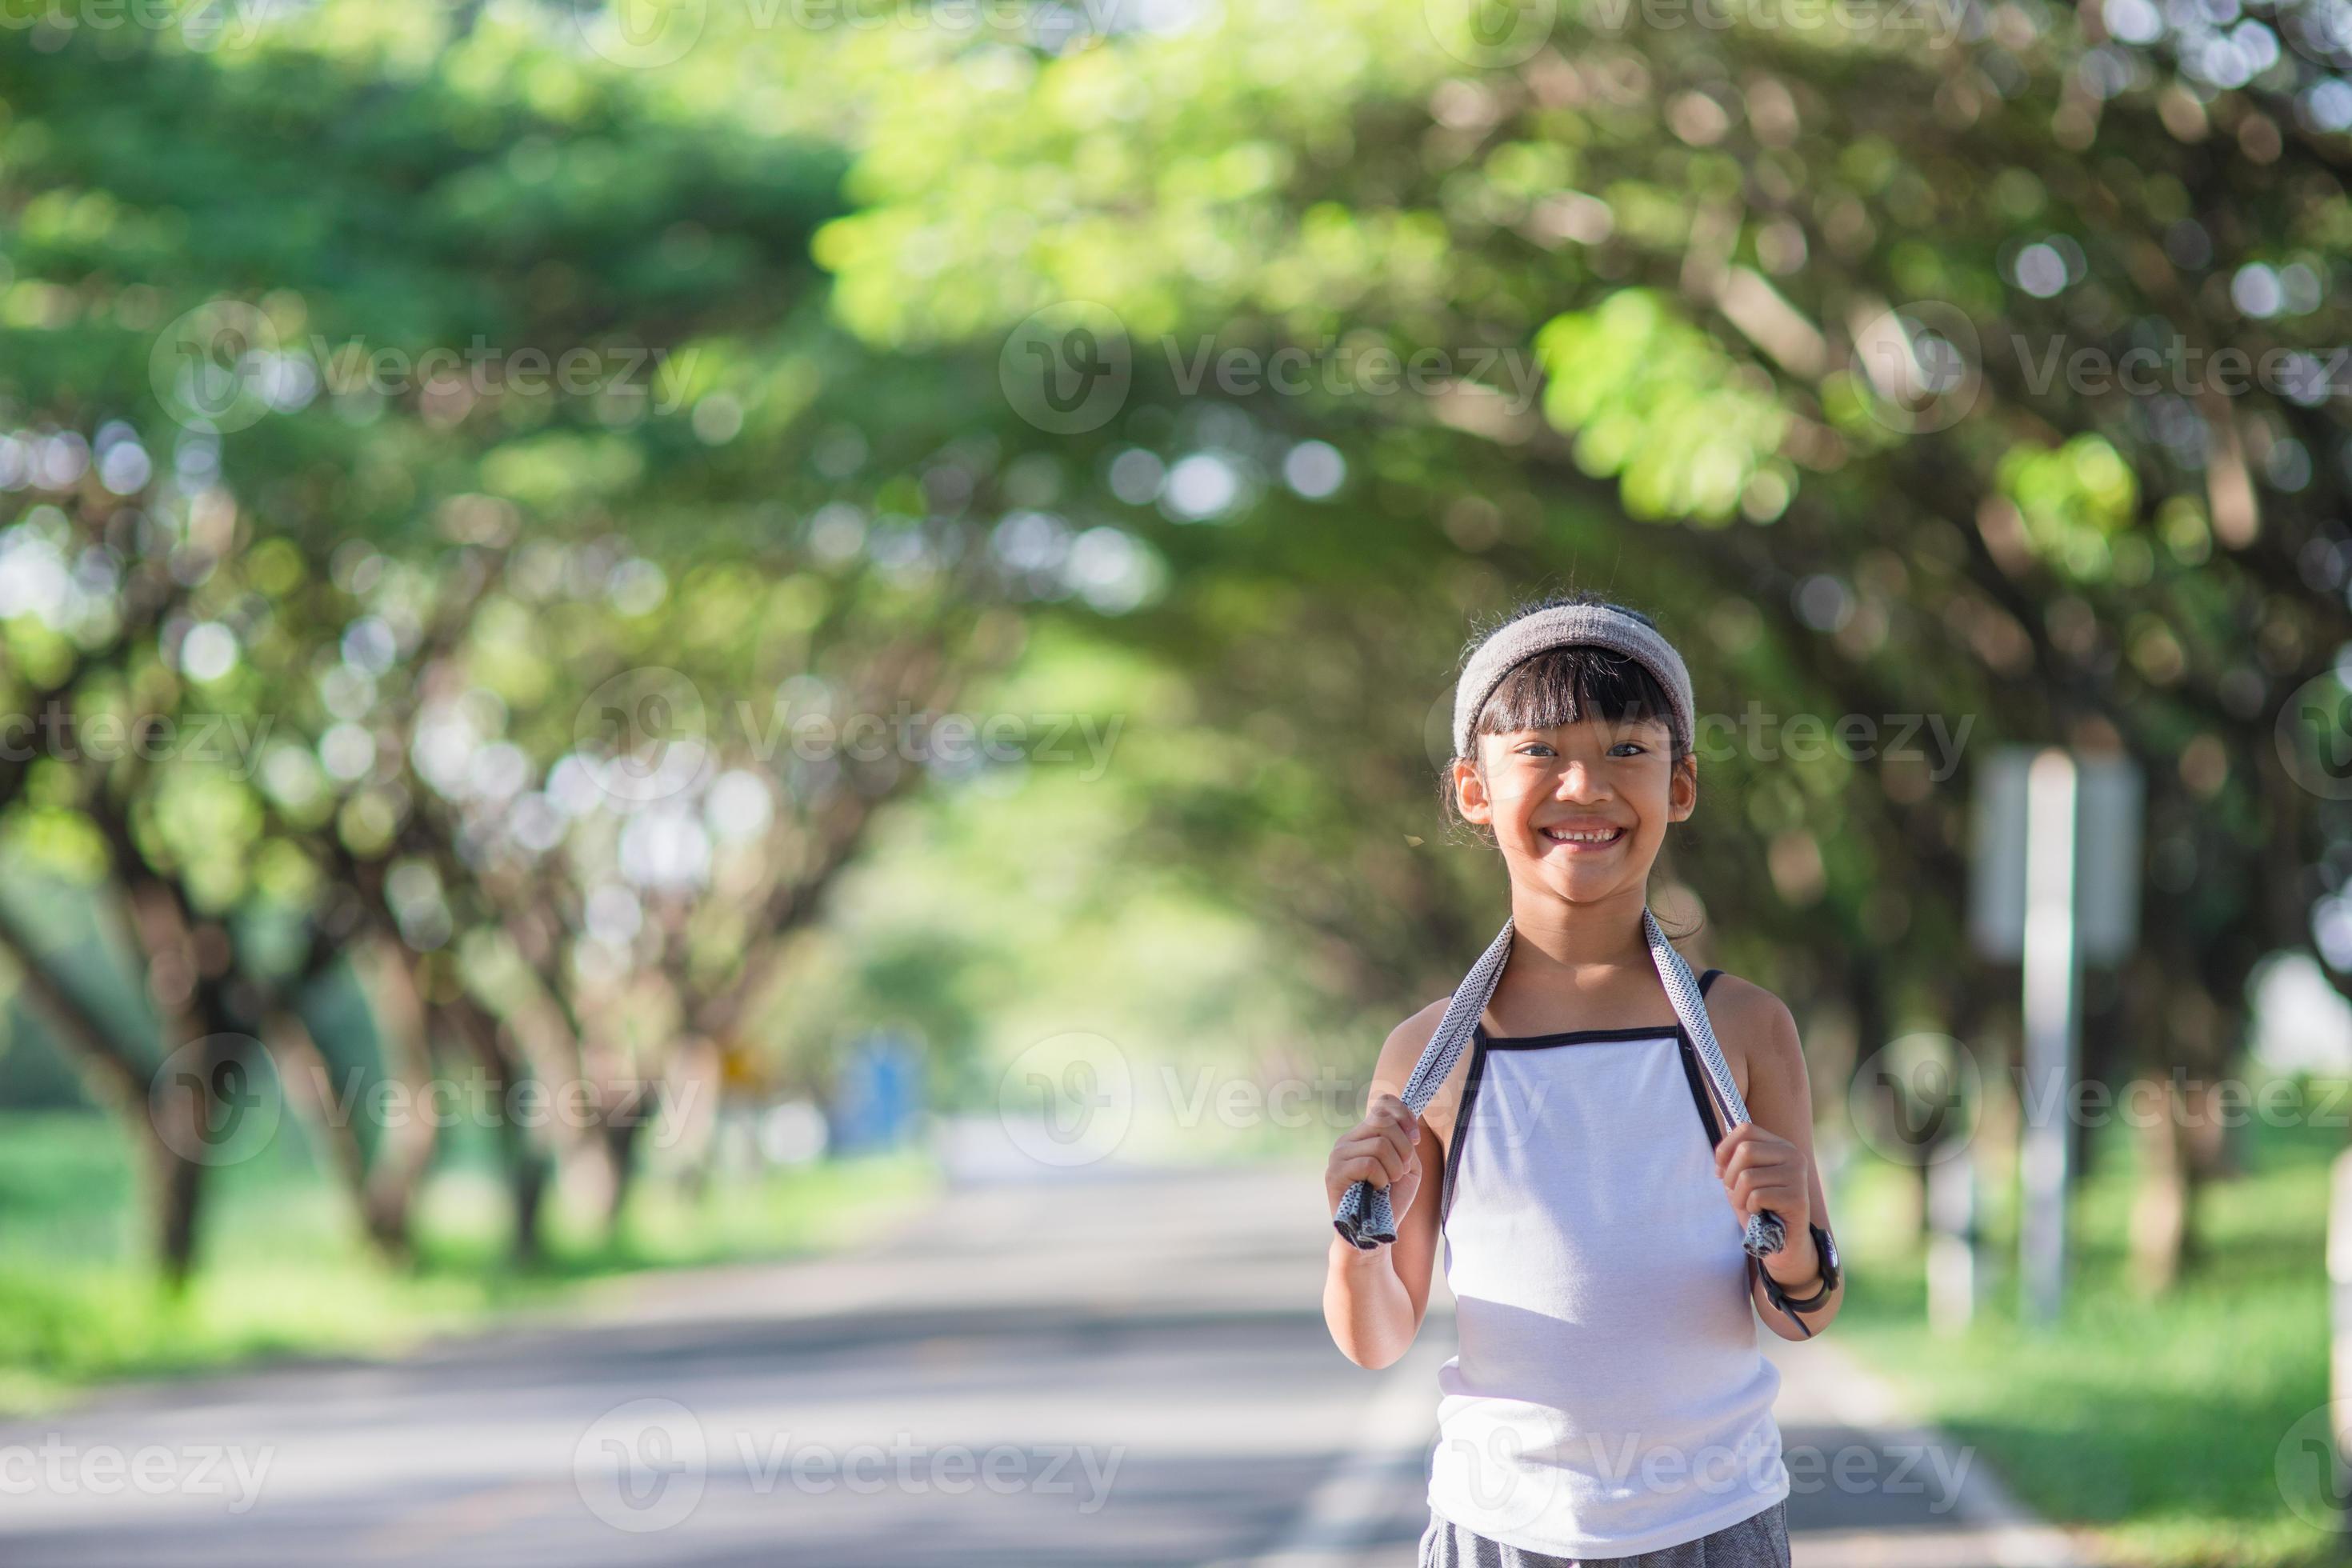 happy child girl running in the park in summer in nature. warm sunlight  flare. asian little is running in a park. outdoor sports and fitness,  exercise and competition learning for kid development.